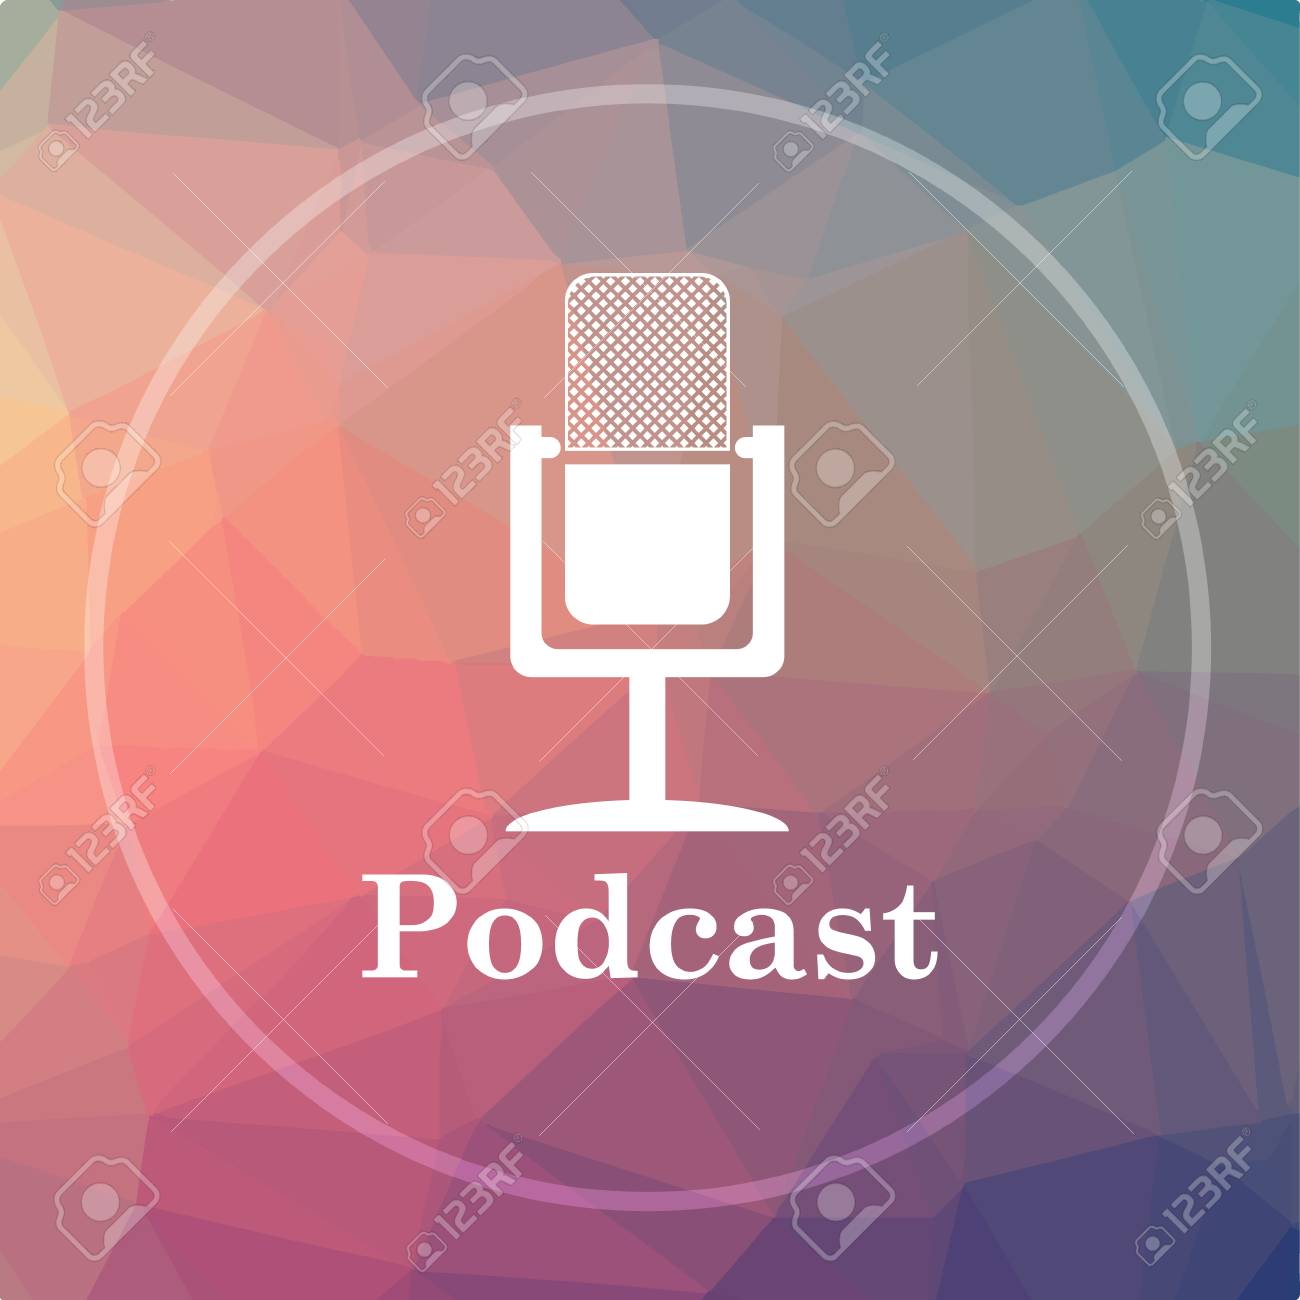 Podcast Icon Website Button On Low Poly Background Stock